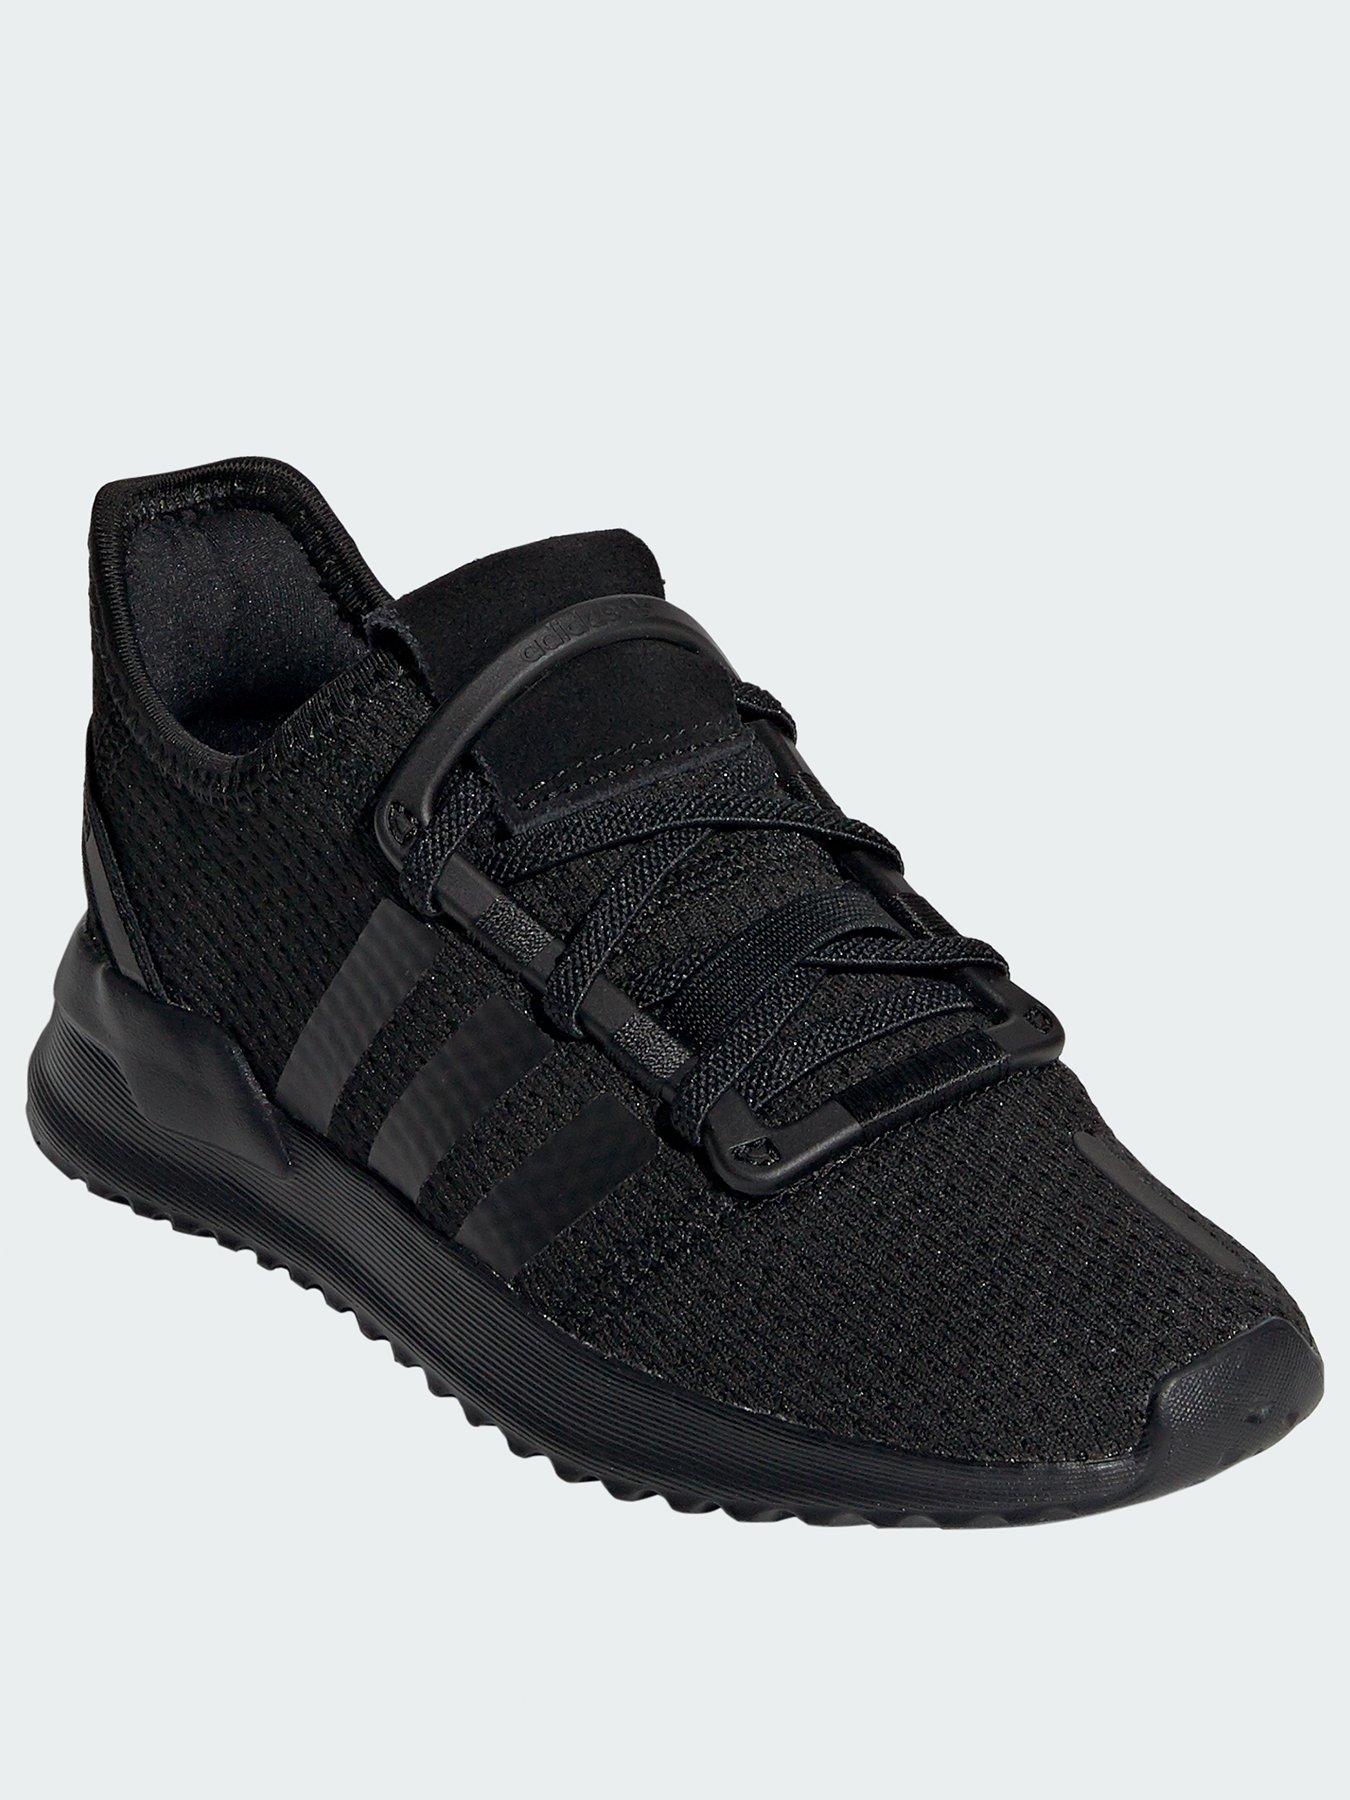 black childrens trainers outlet ef4d6 56e63